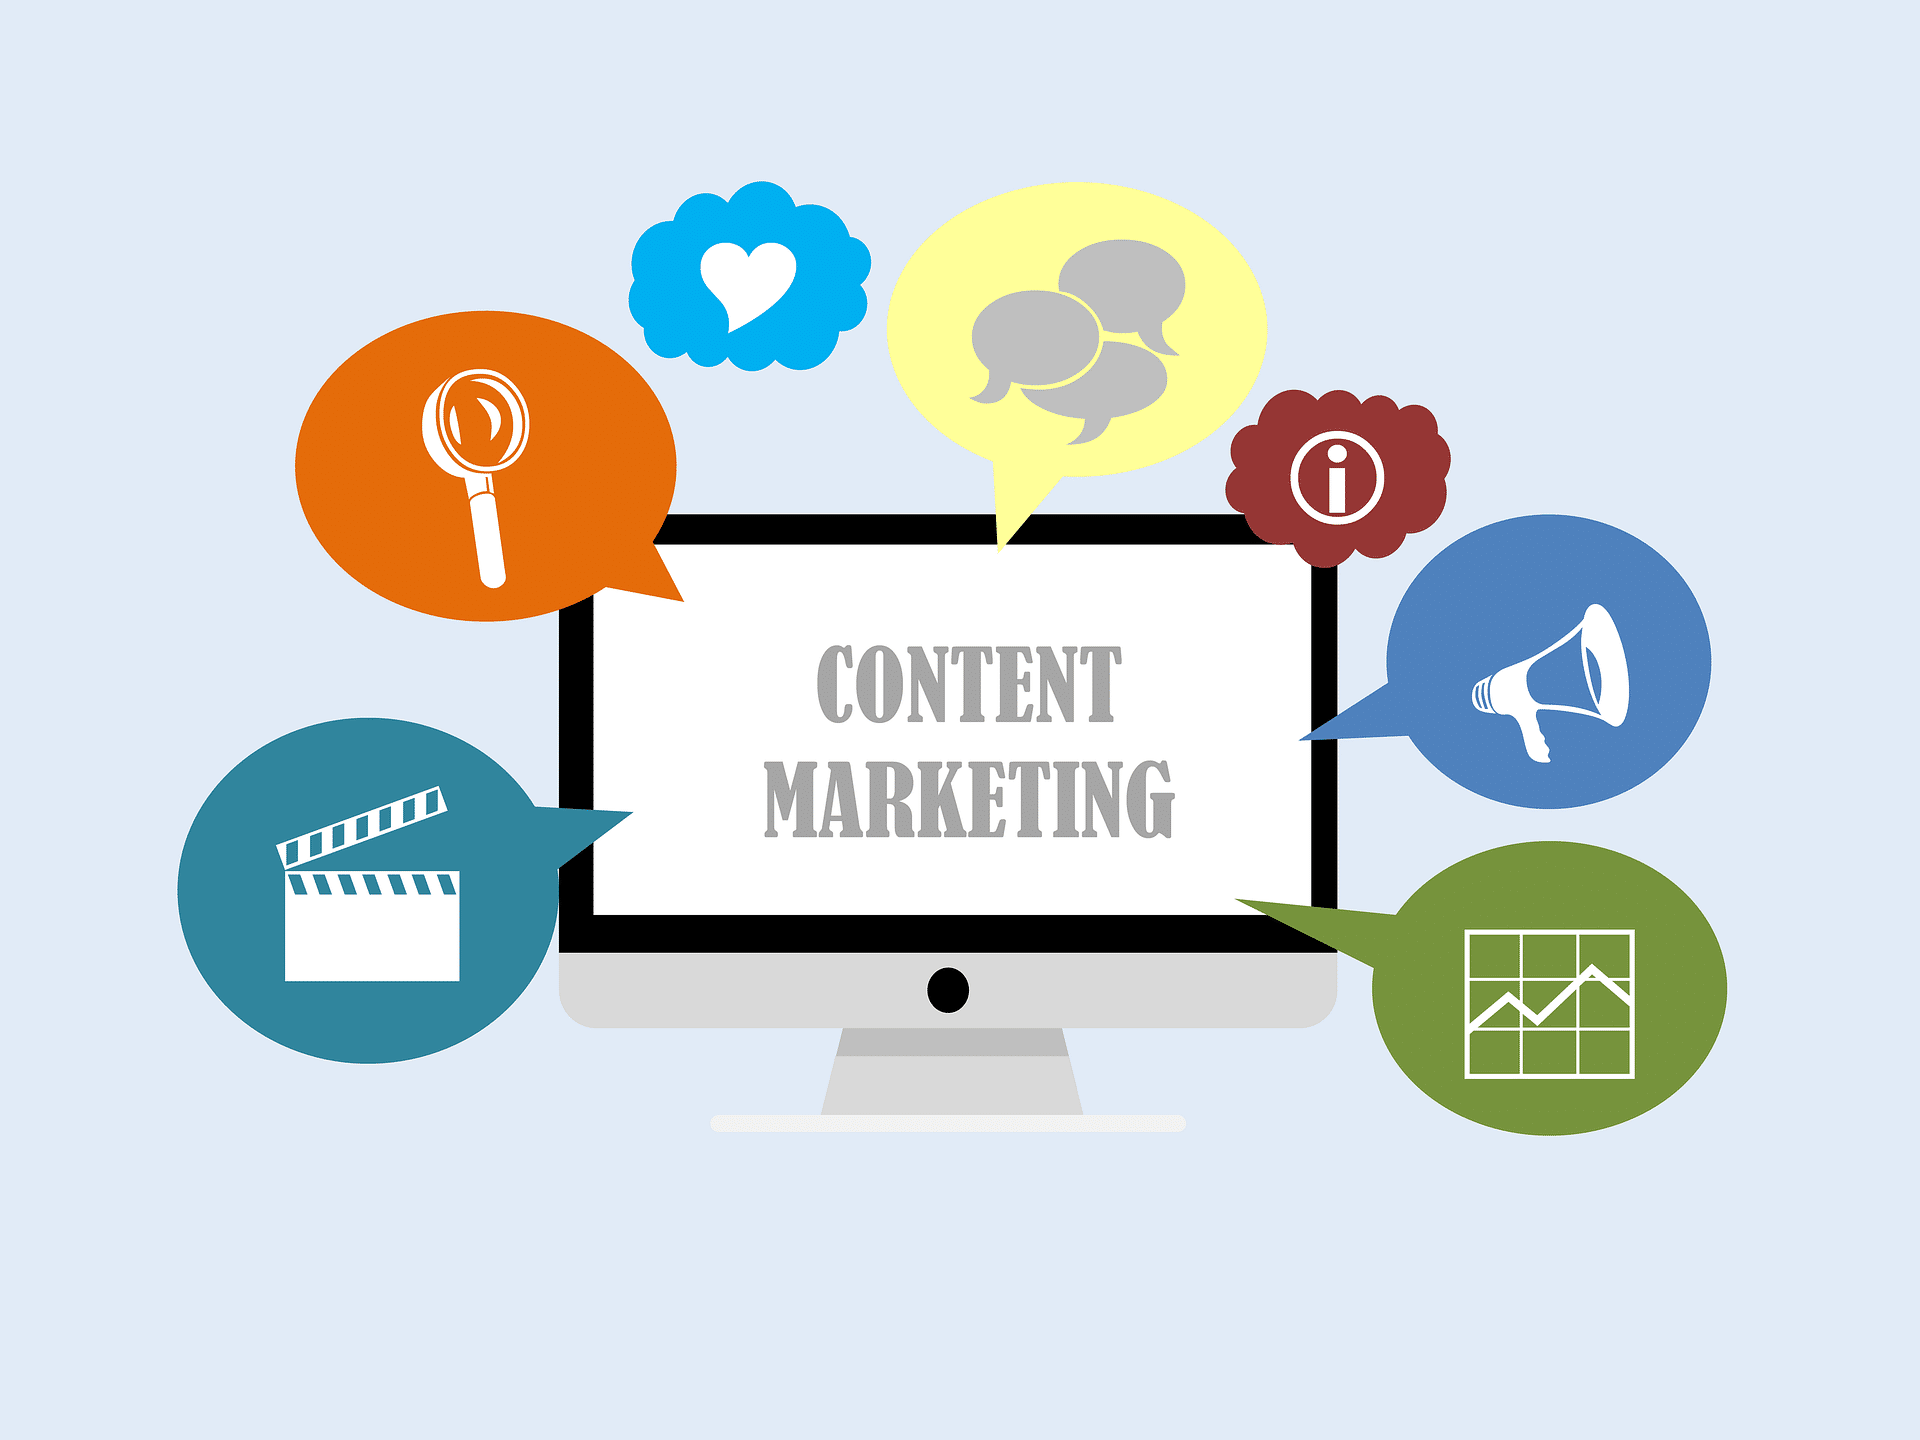 Content marketing is the process of creating and distributing valuable, relevant, and engaging content that attracts and converts prospects into customers.